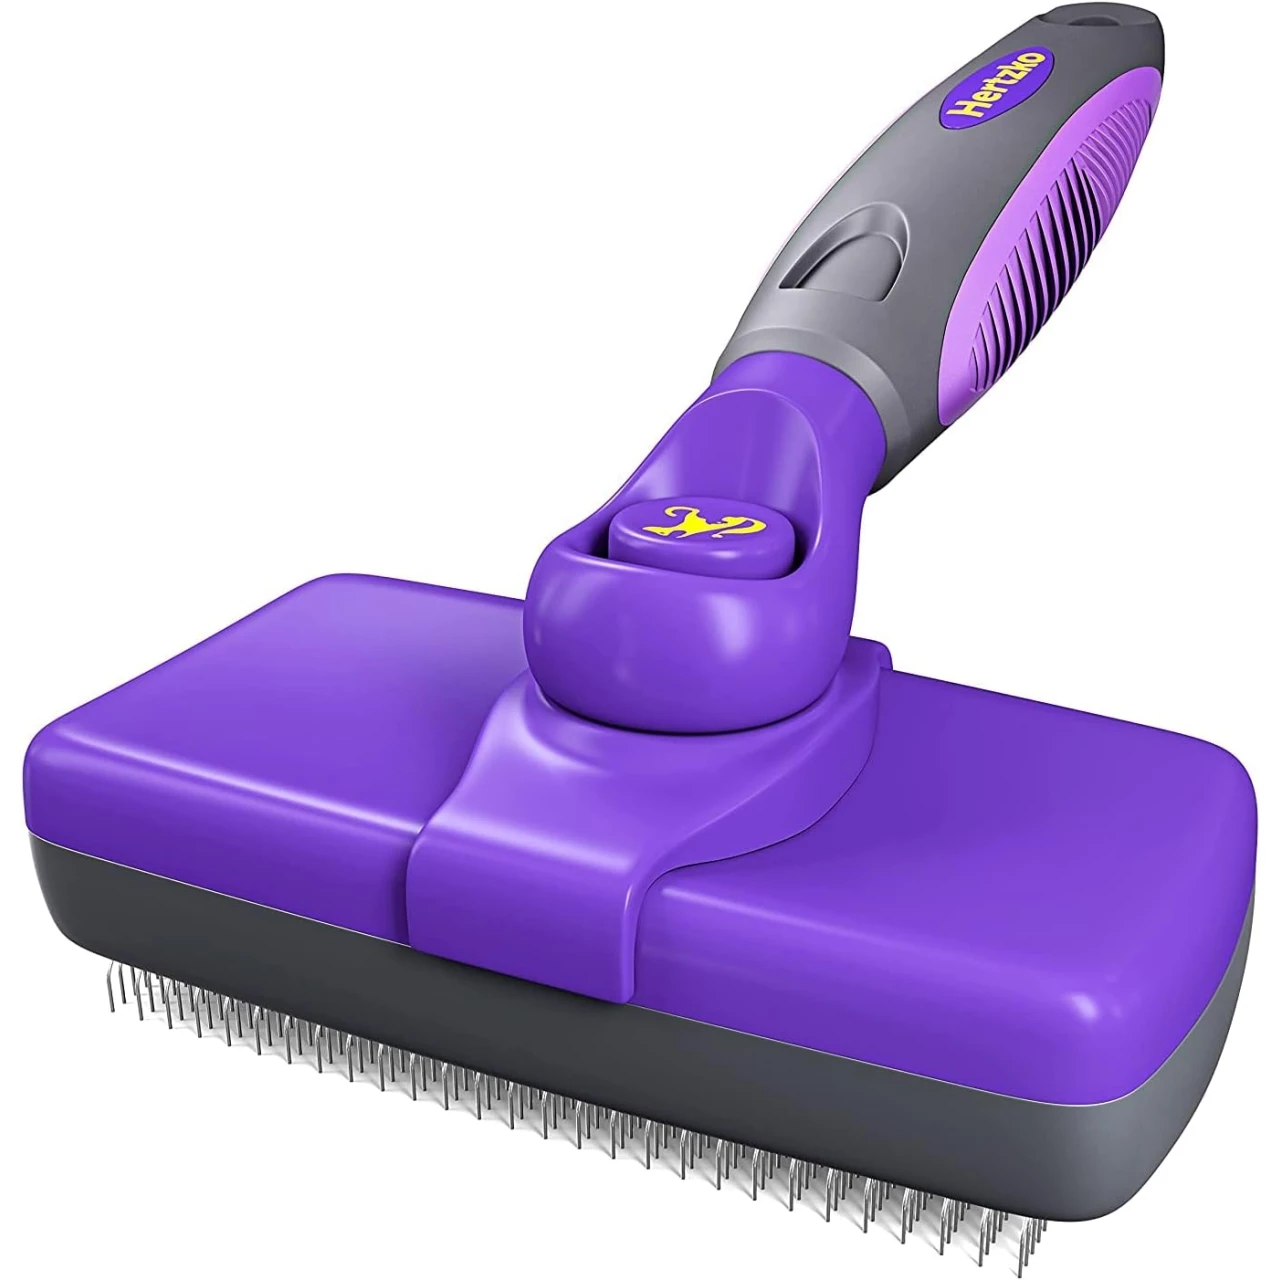 Hertzko Self-Cleaning Slicker Brush for Dogs and Cats - Shedding Hair and Fur - Comb for Grooming